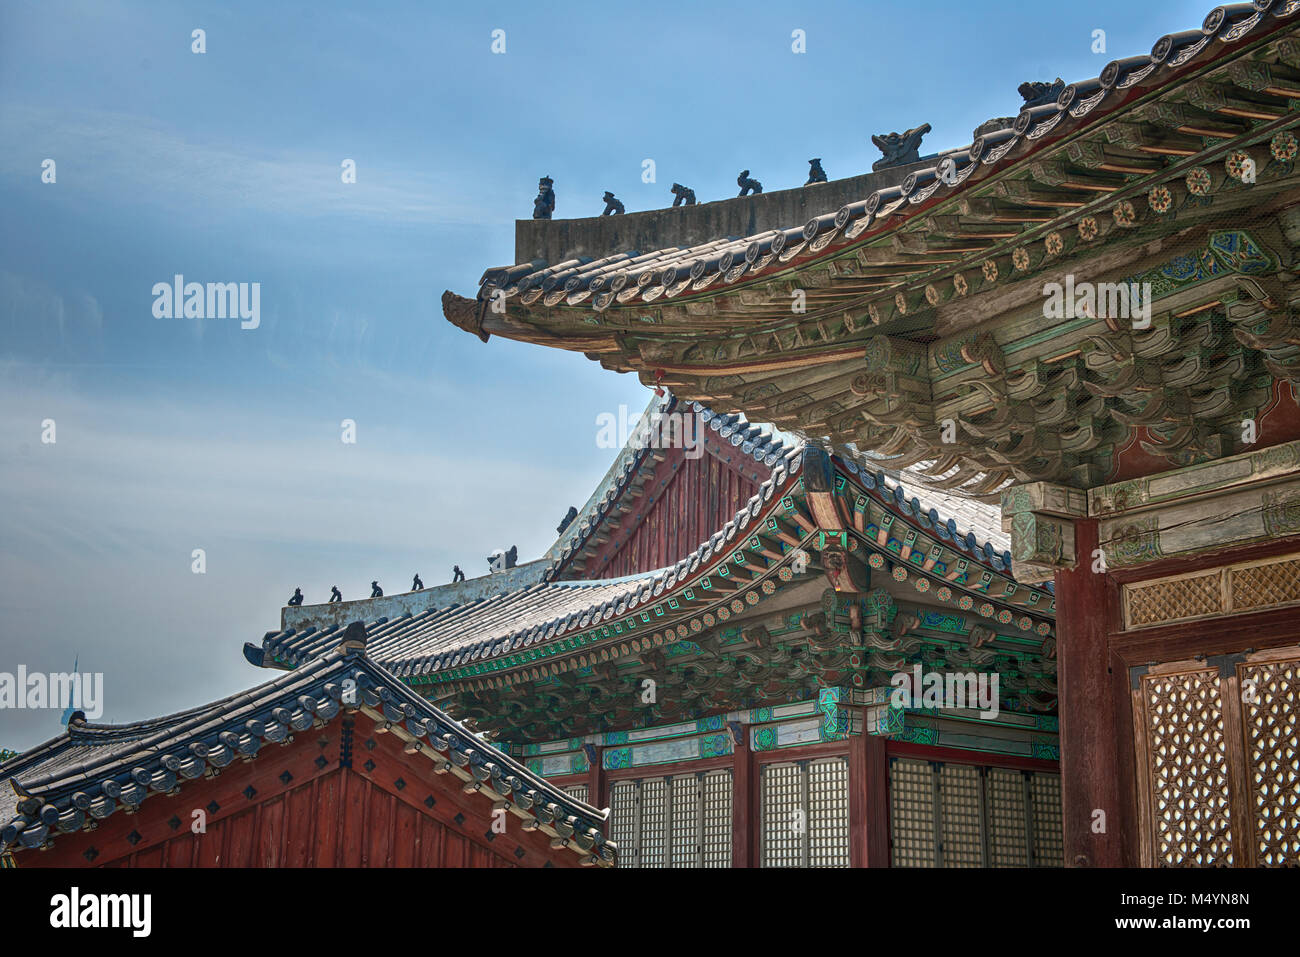 Traditional korea roof decoration. blue sky and Colorful structures Stock Photo